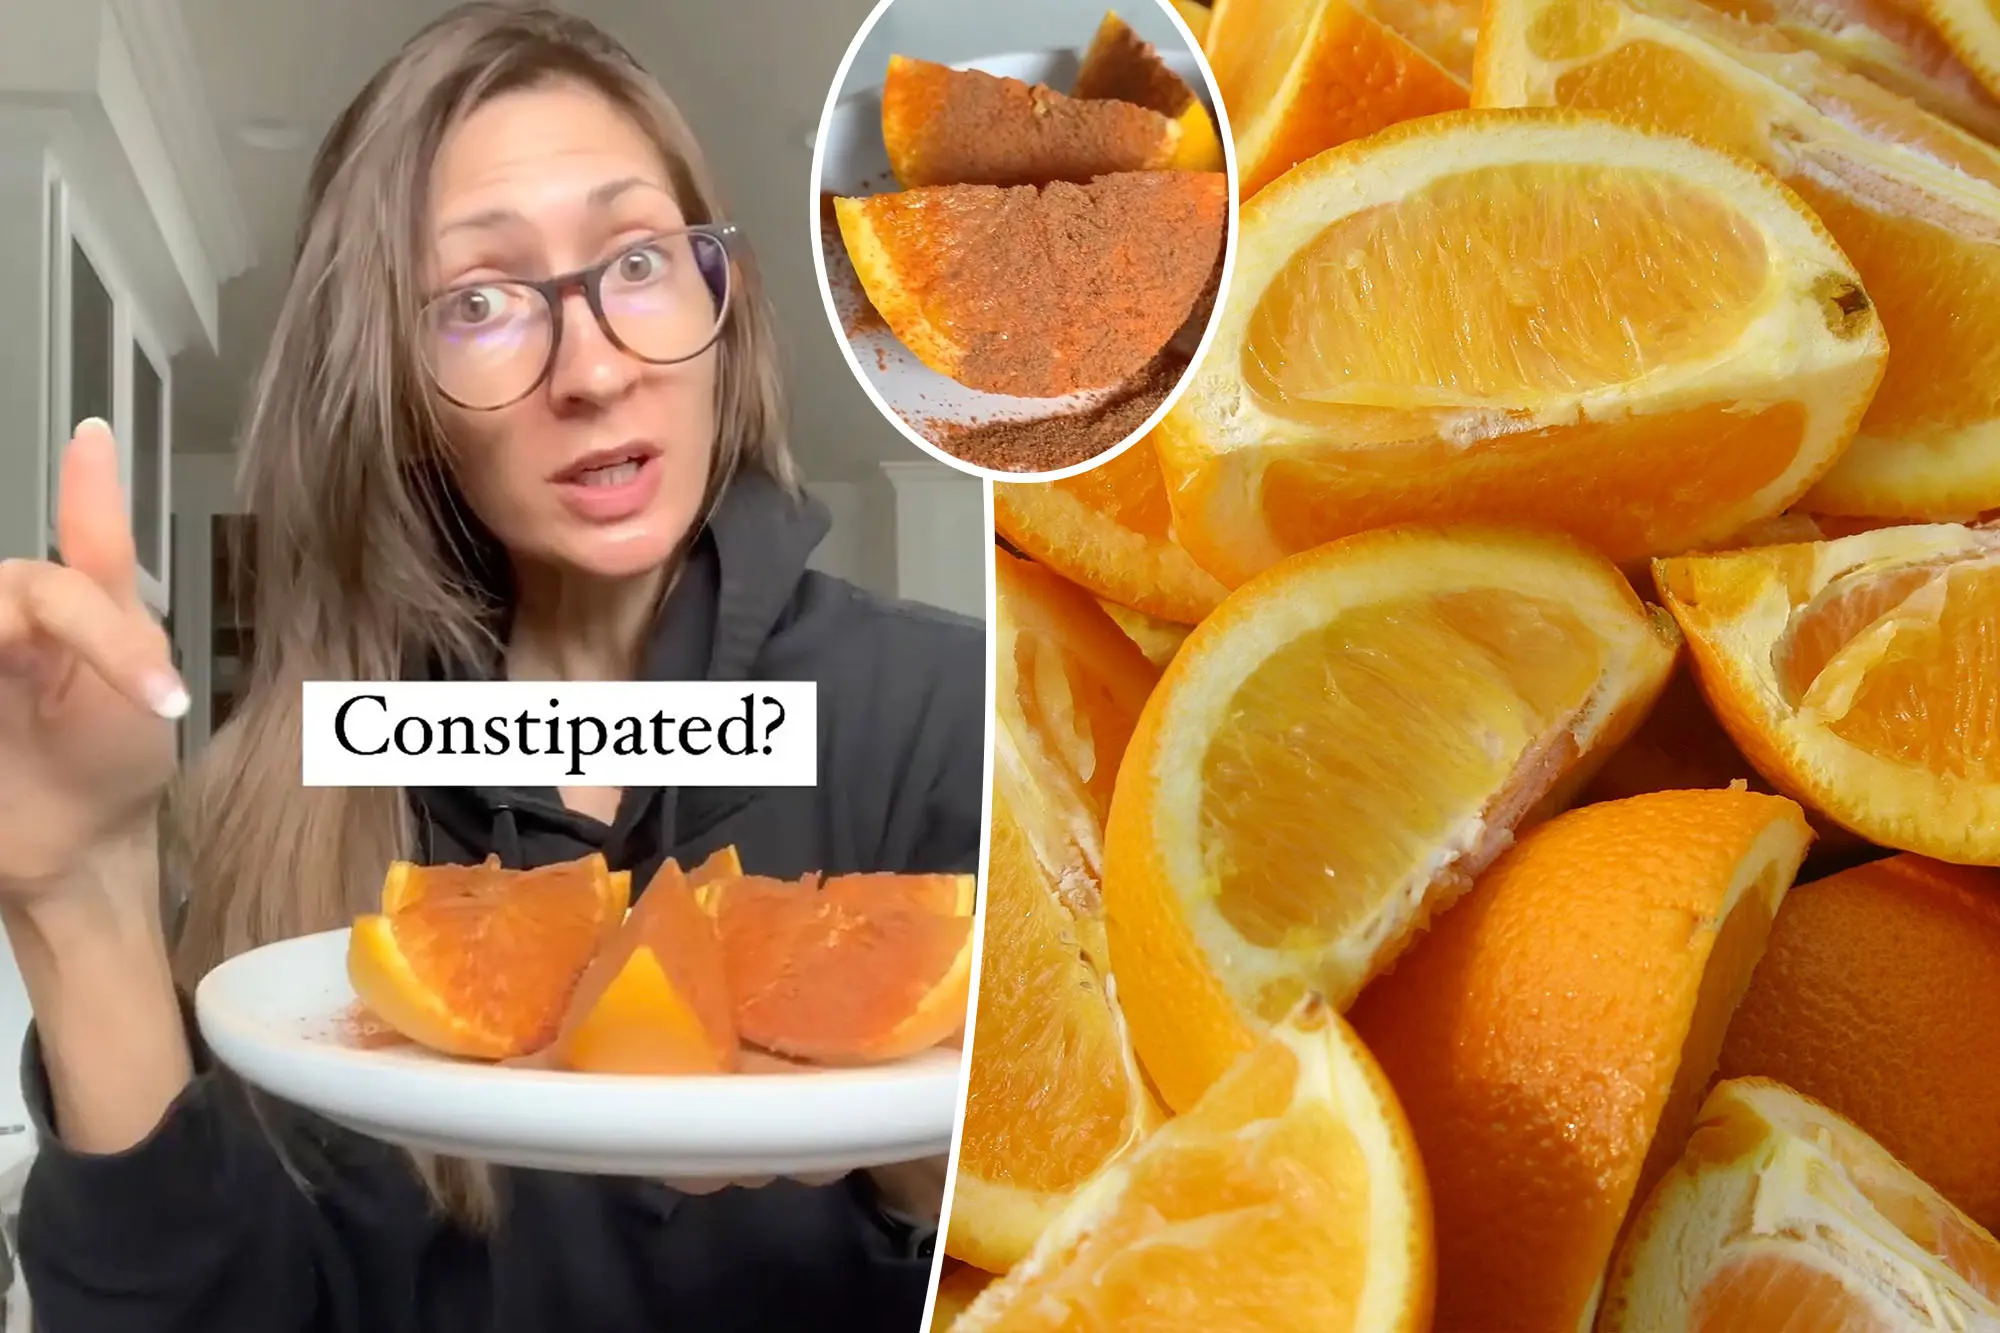 Is an orange with the peel a perfect cure for constipation? One woman seems to think so...